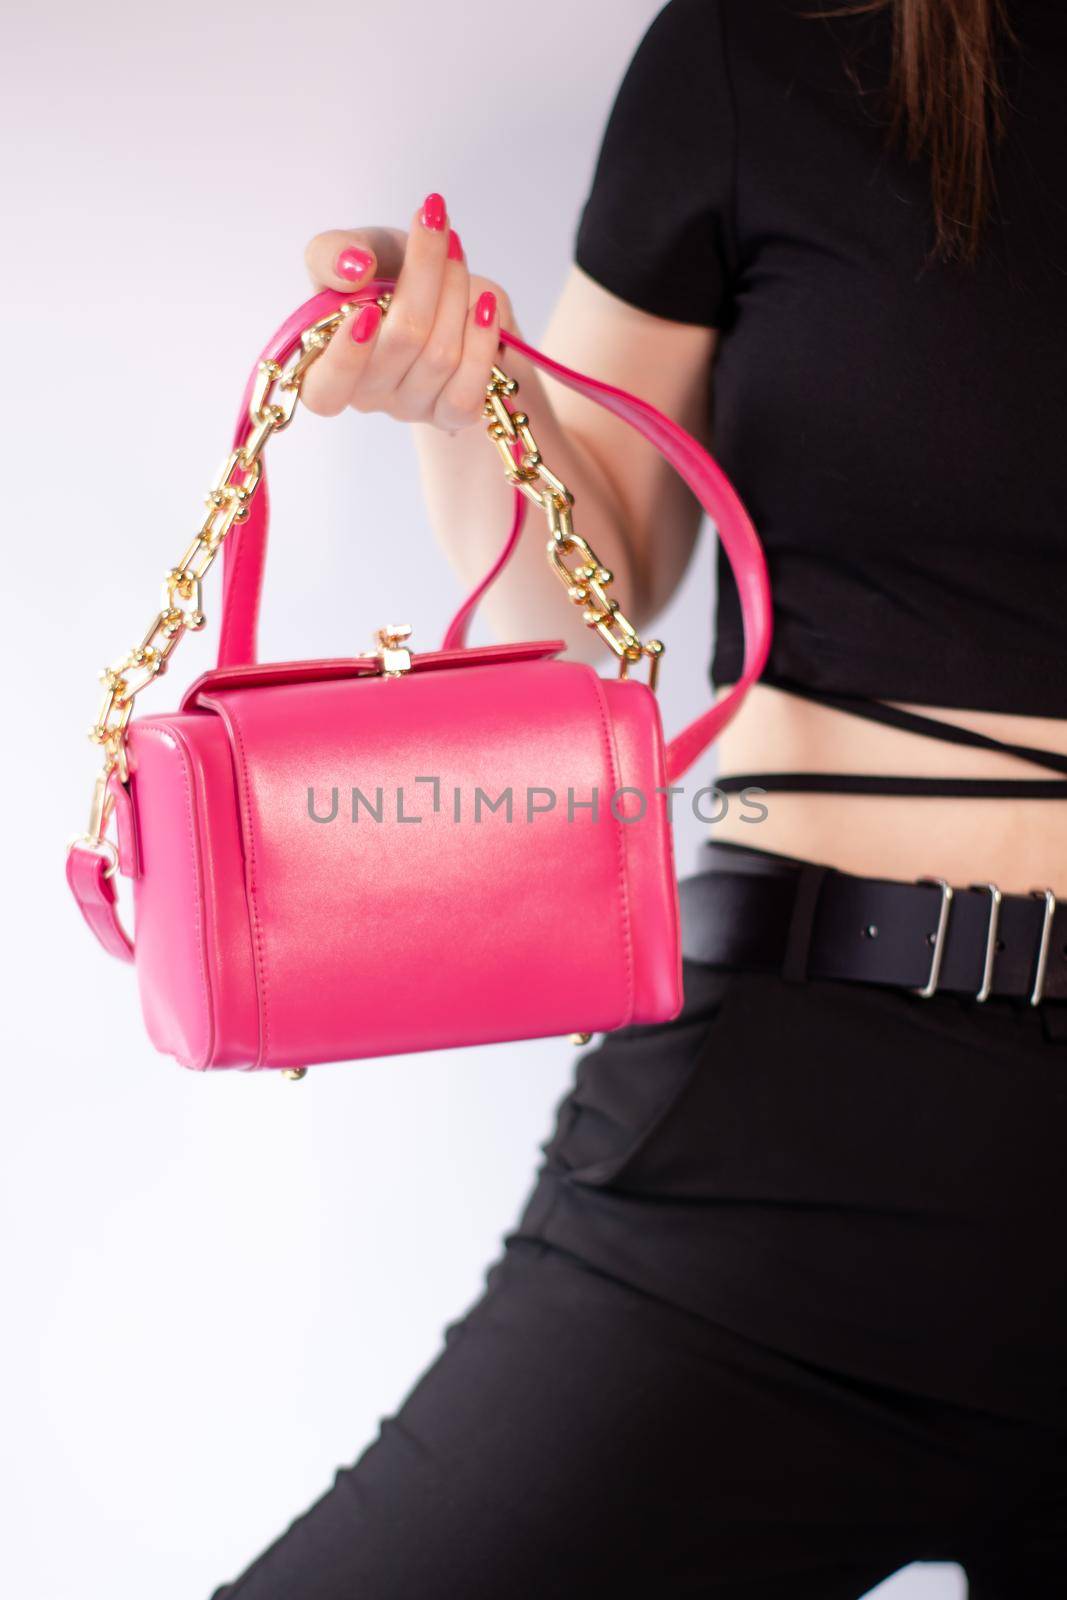 womans hand holding a pretty little pink handbag. Product photography. stylish handbag and purse for women